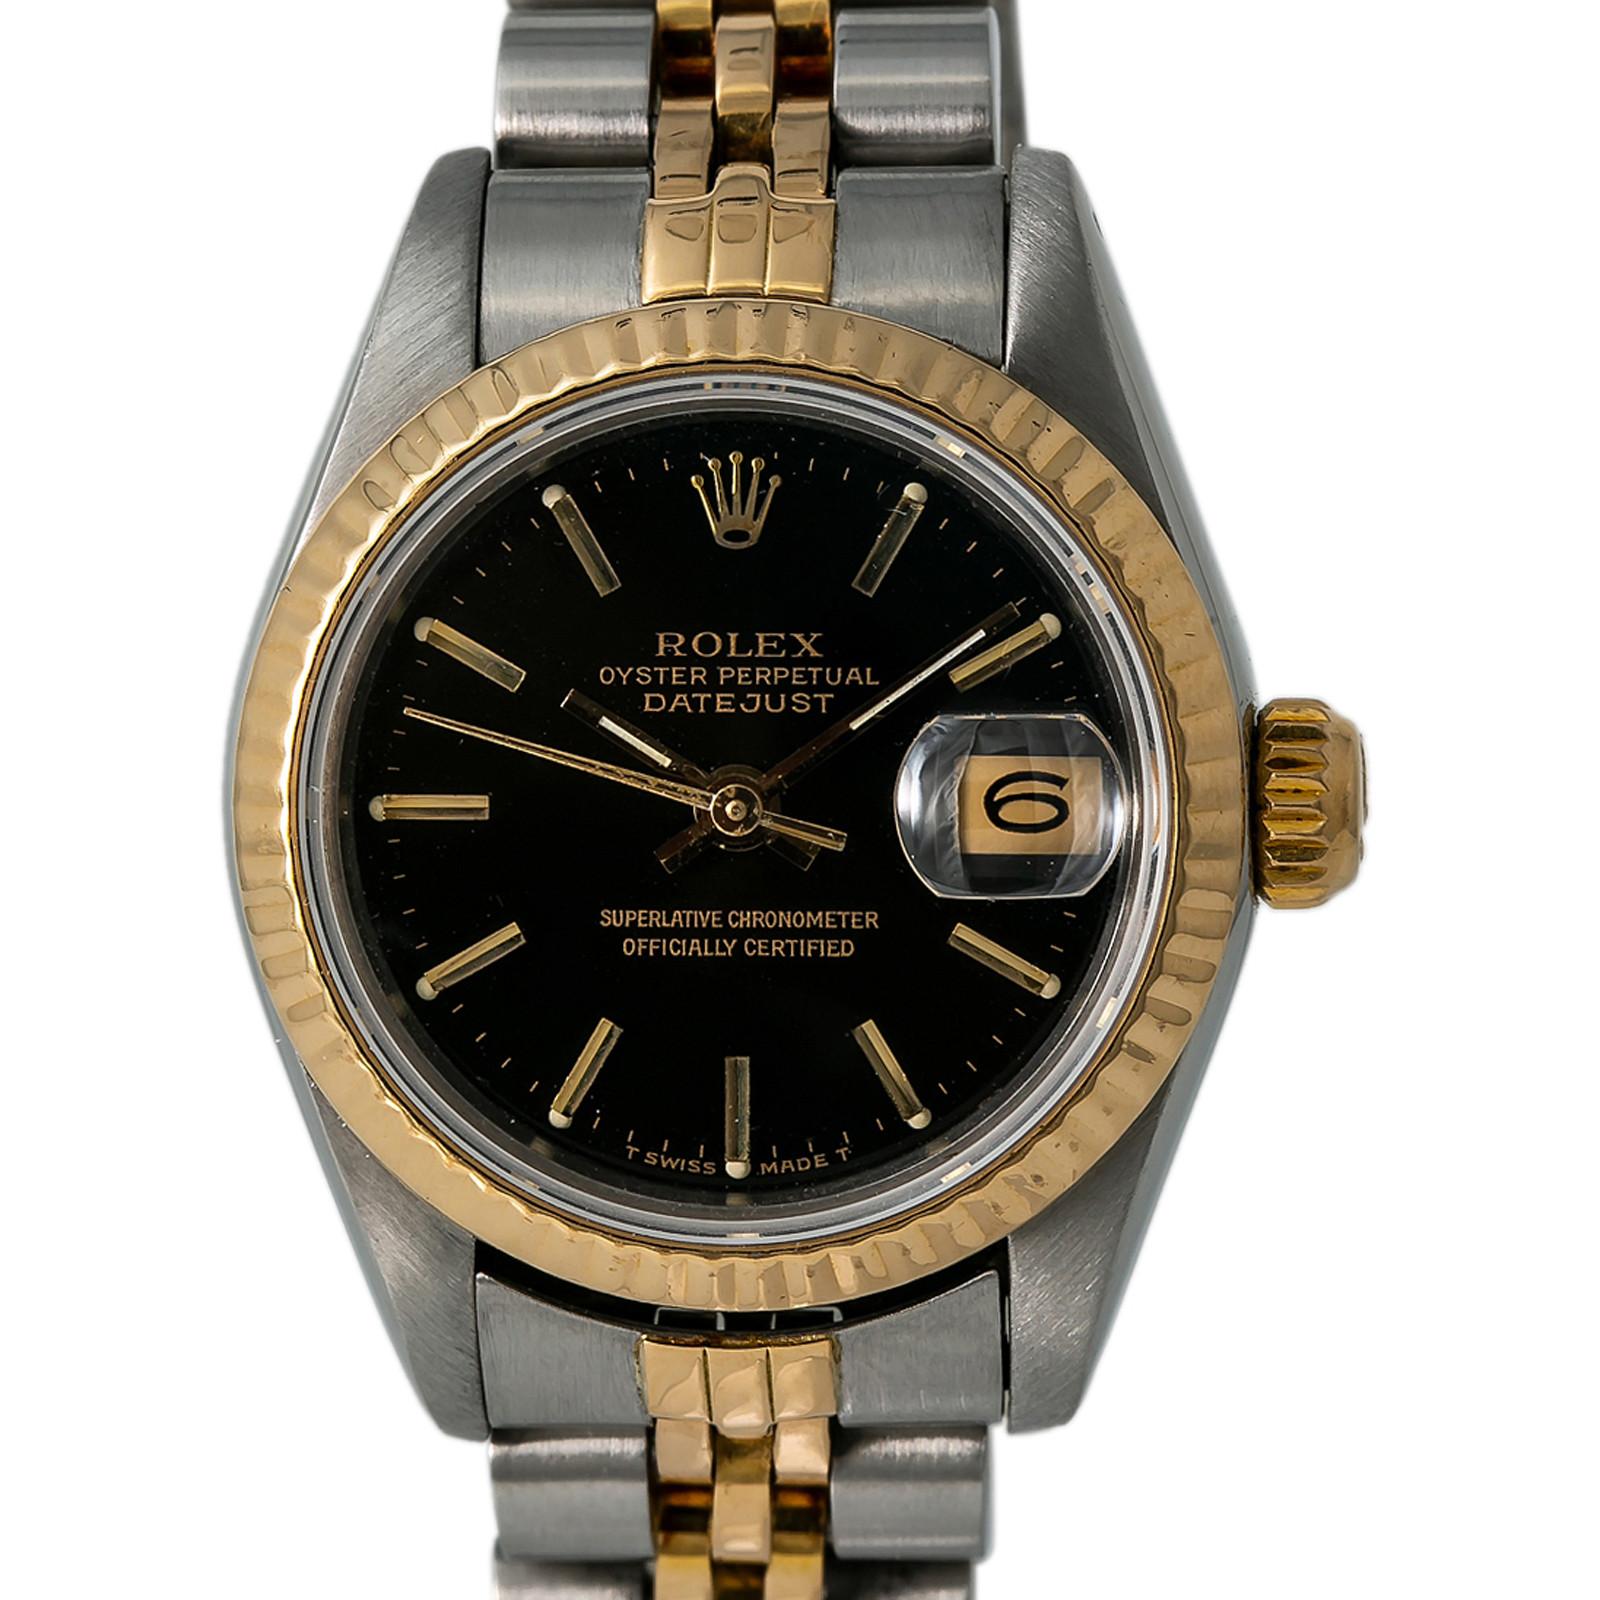 Contemporary Rolex Datejust 69173, Black Dial, Certified and Warranty